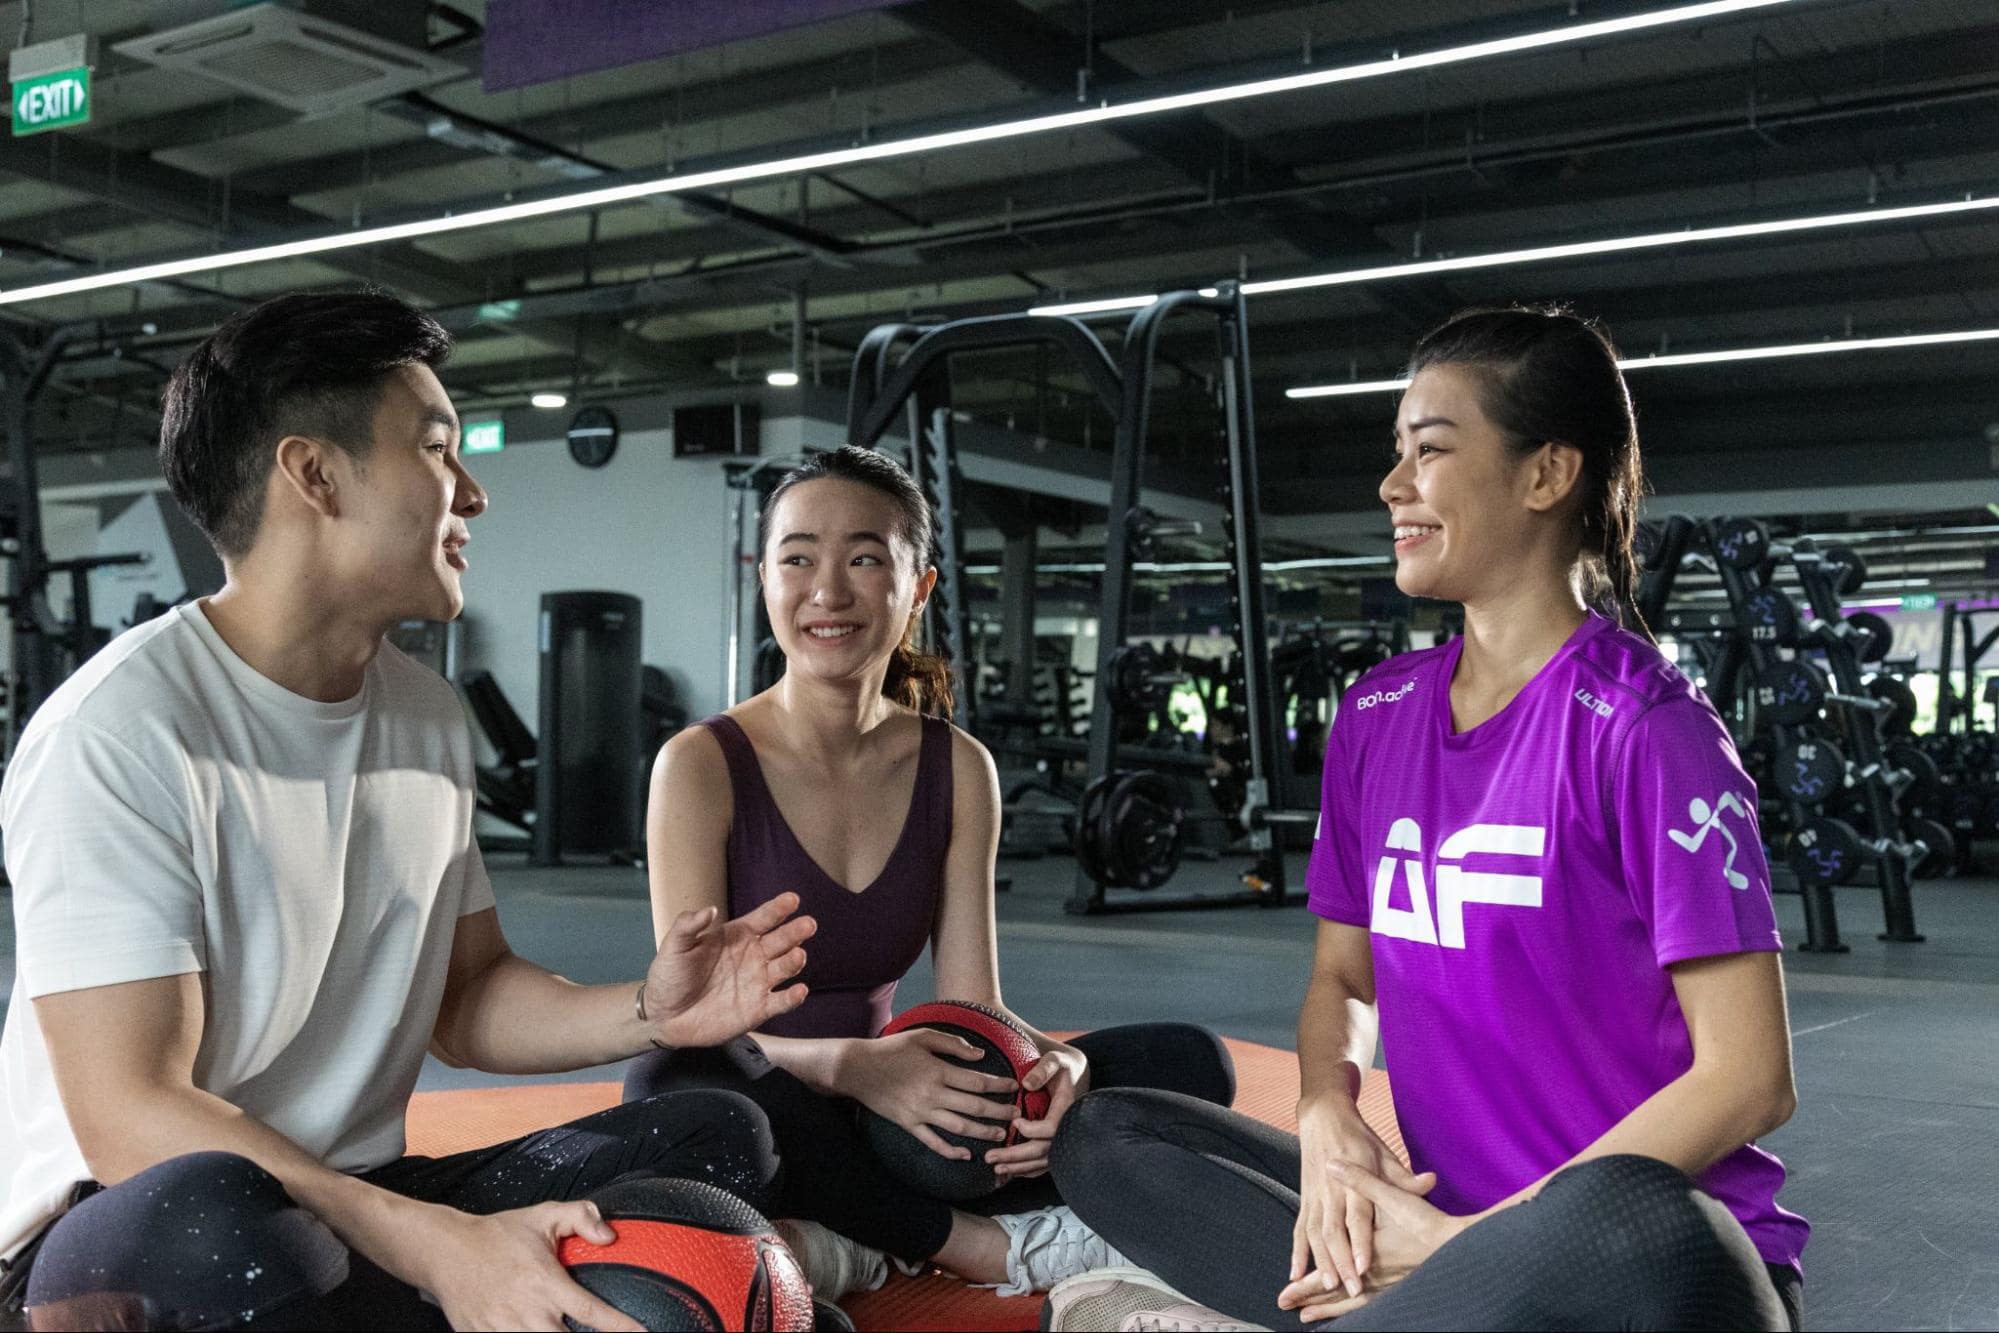 anytime fitness membership-gym goers talking